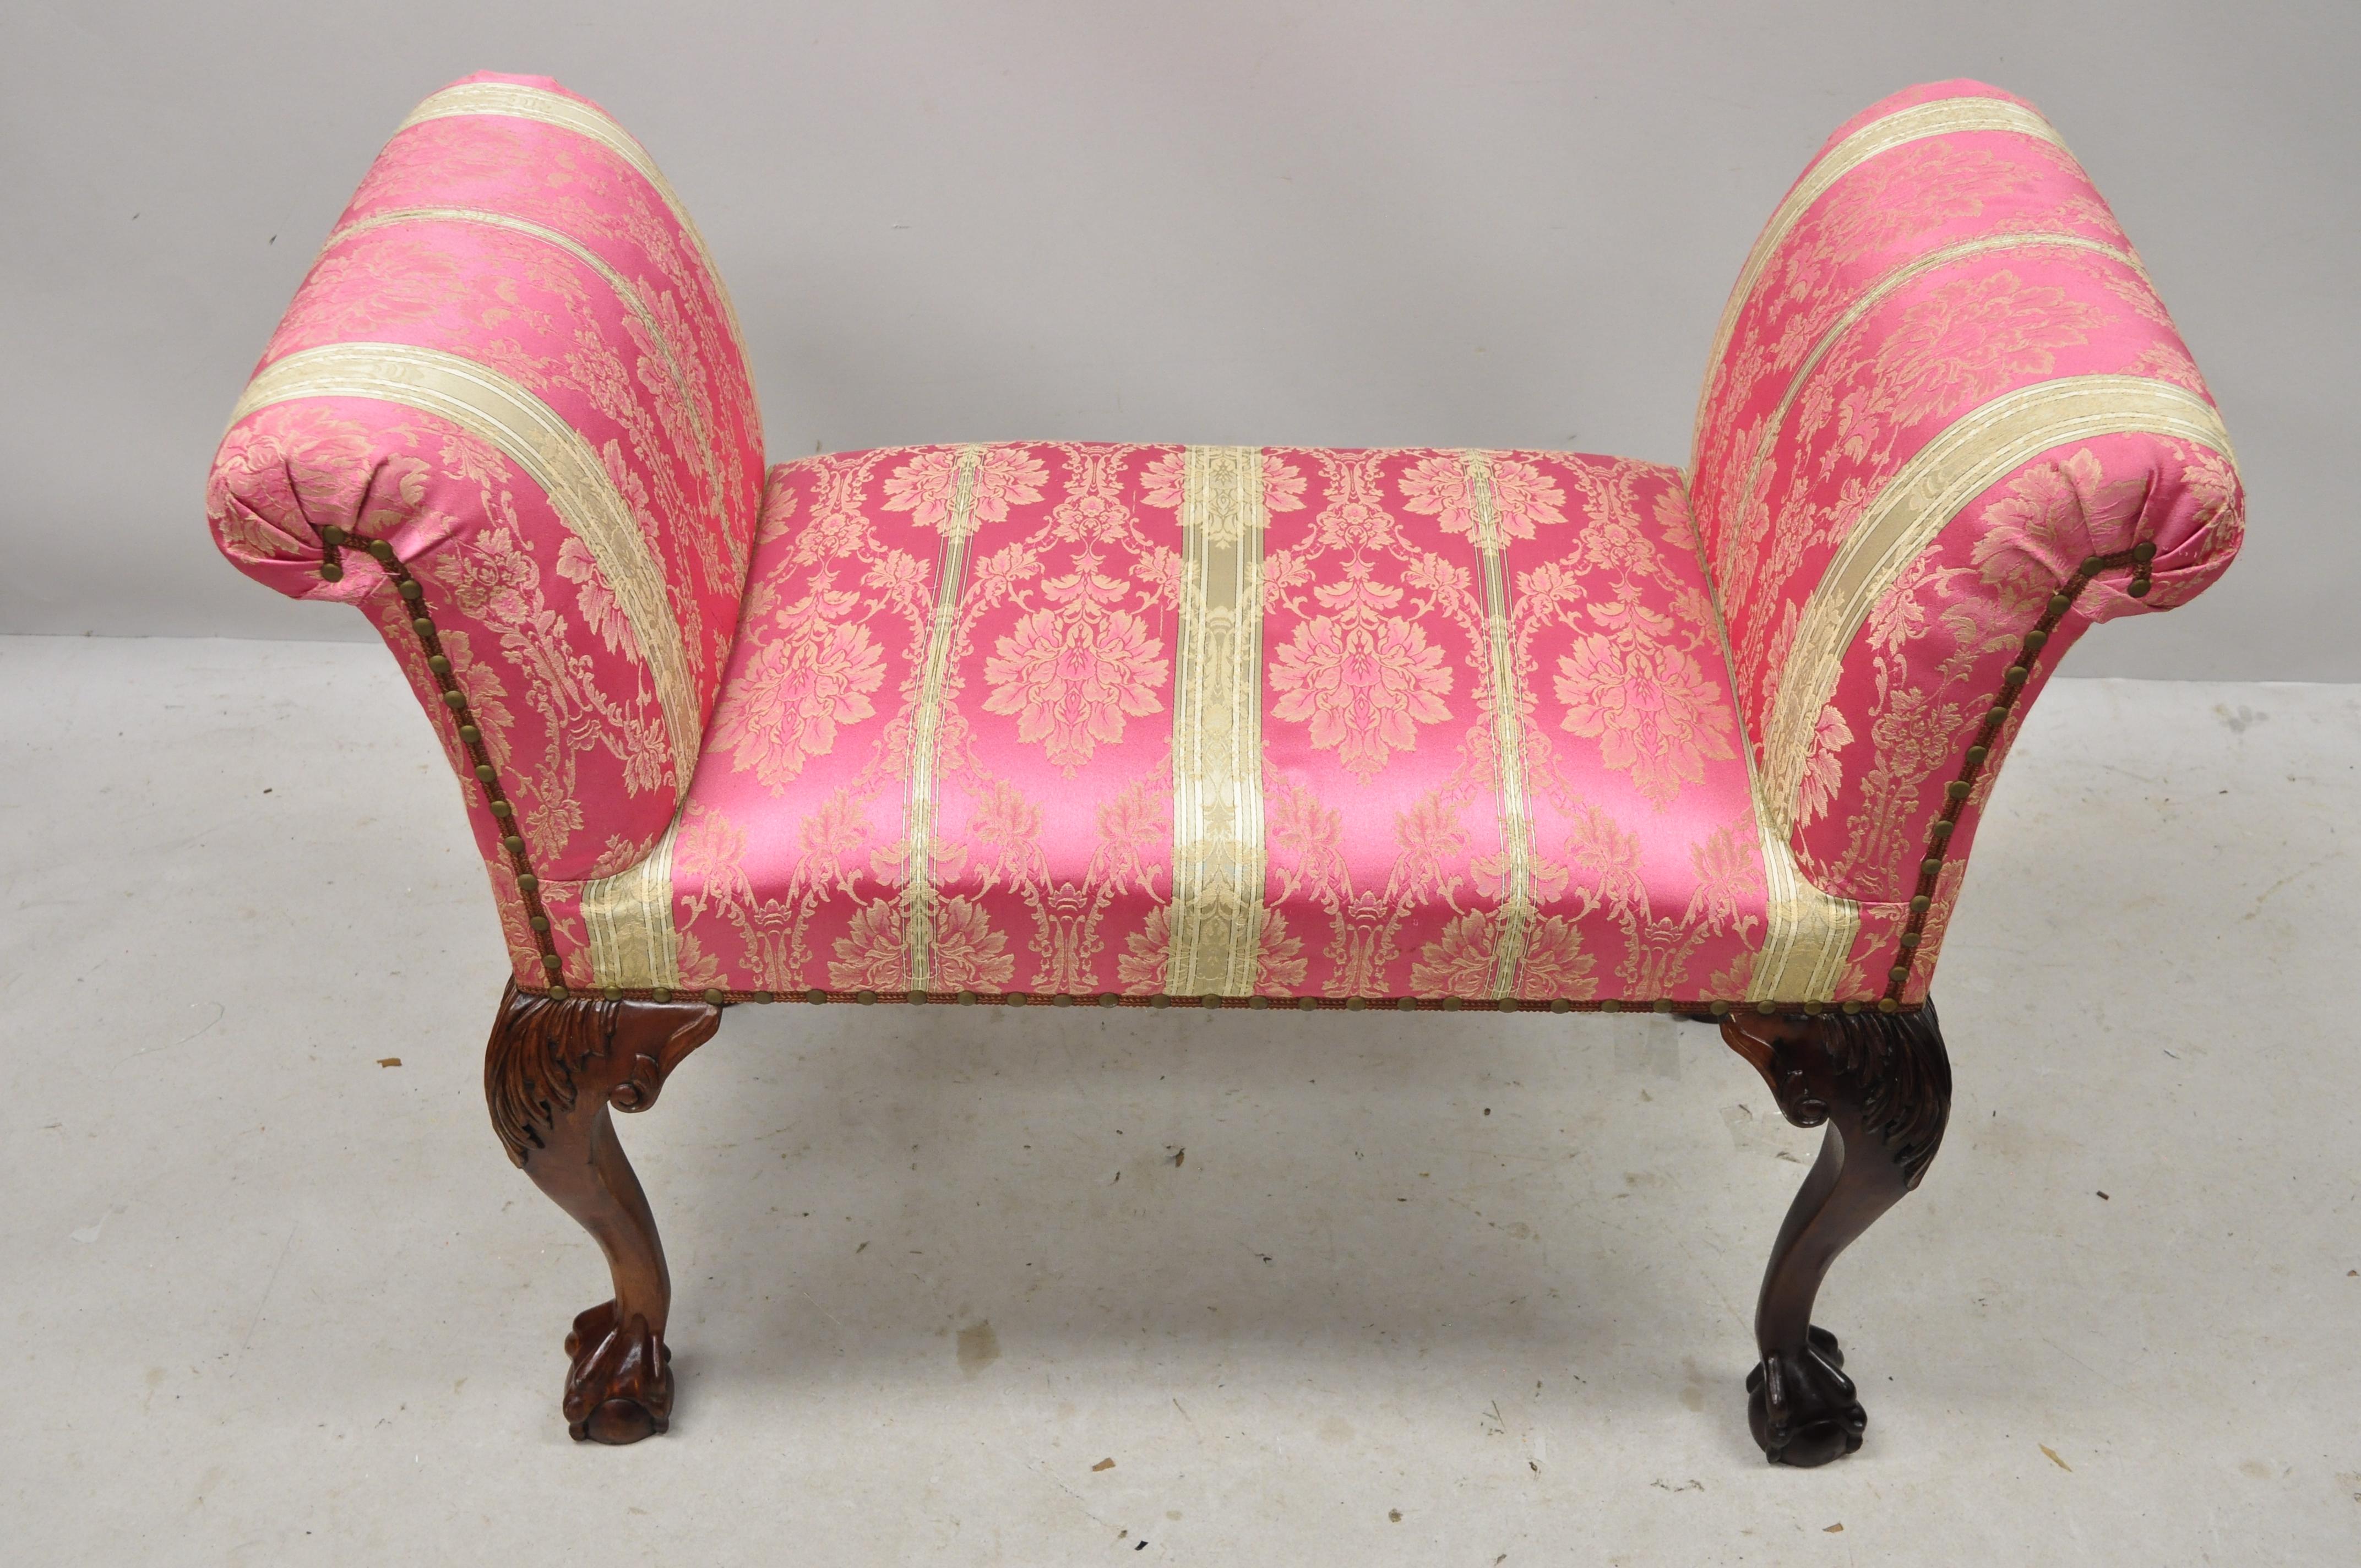 Vintage paramount antiques inc Chippendale style mahogany ball and claw pink upholstered bench. Item features solid wood construction, nicely carved details, original label, carved ball and claw feet, great style and form, circa mid-late 20th